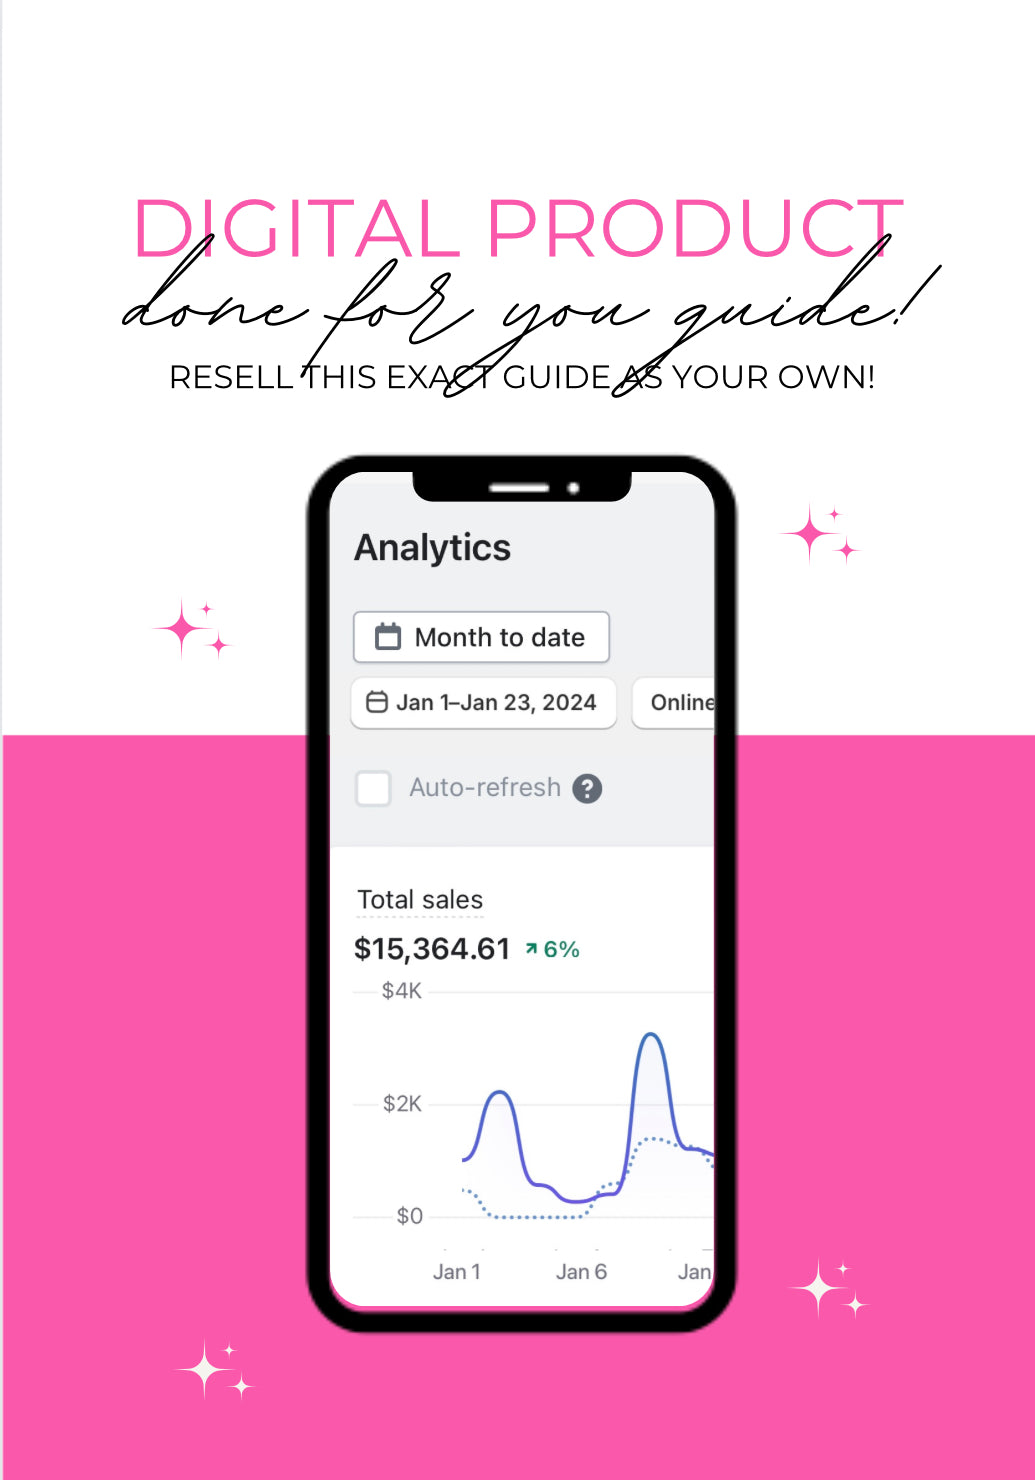 DFY Digital Product Guide